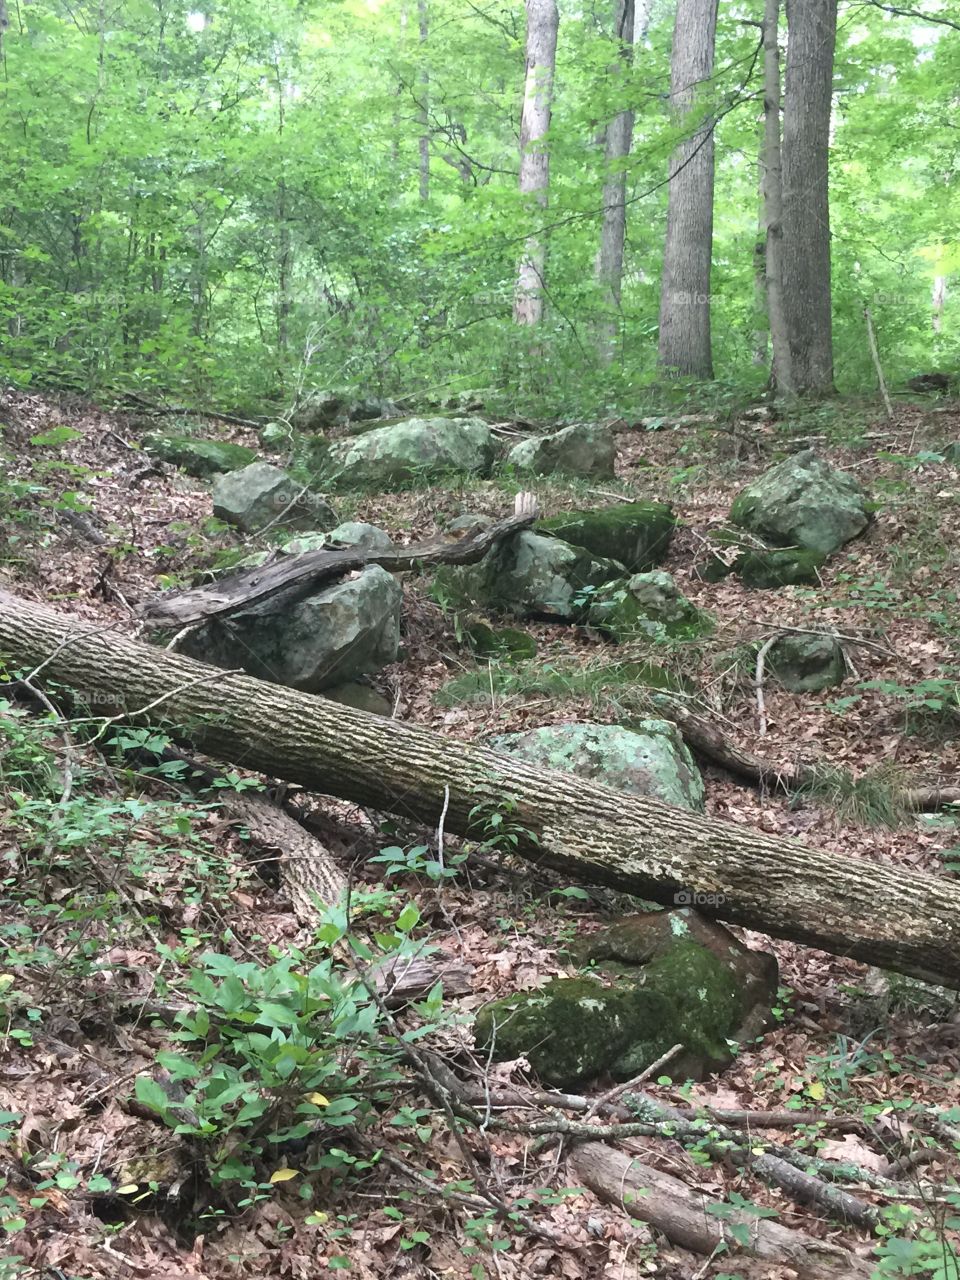 Large rocks in the forest